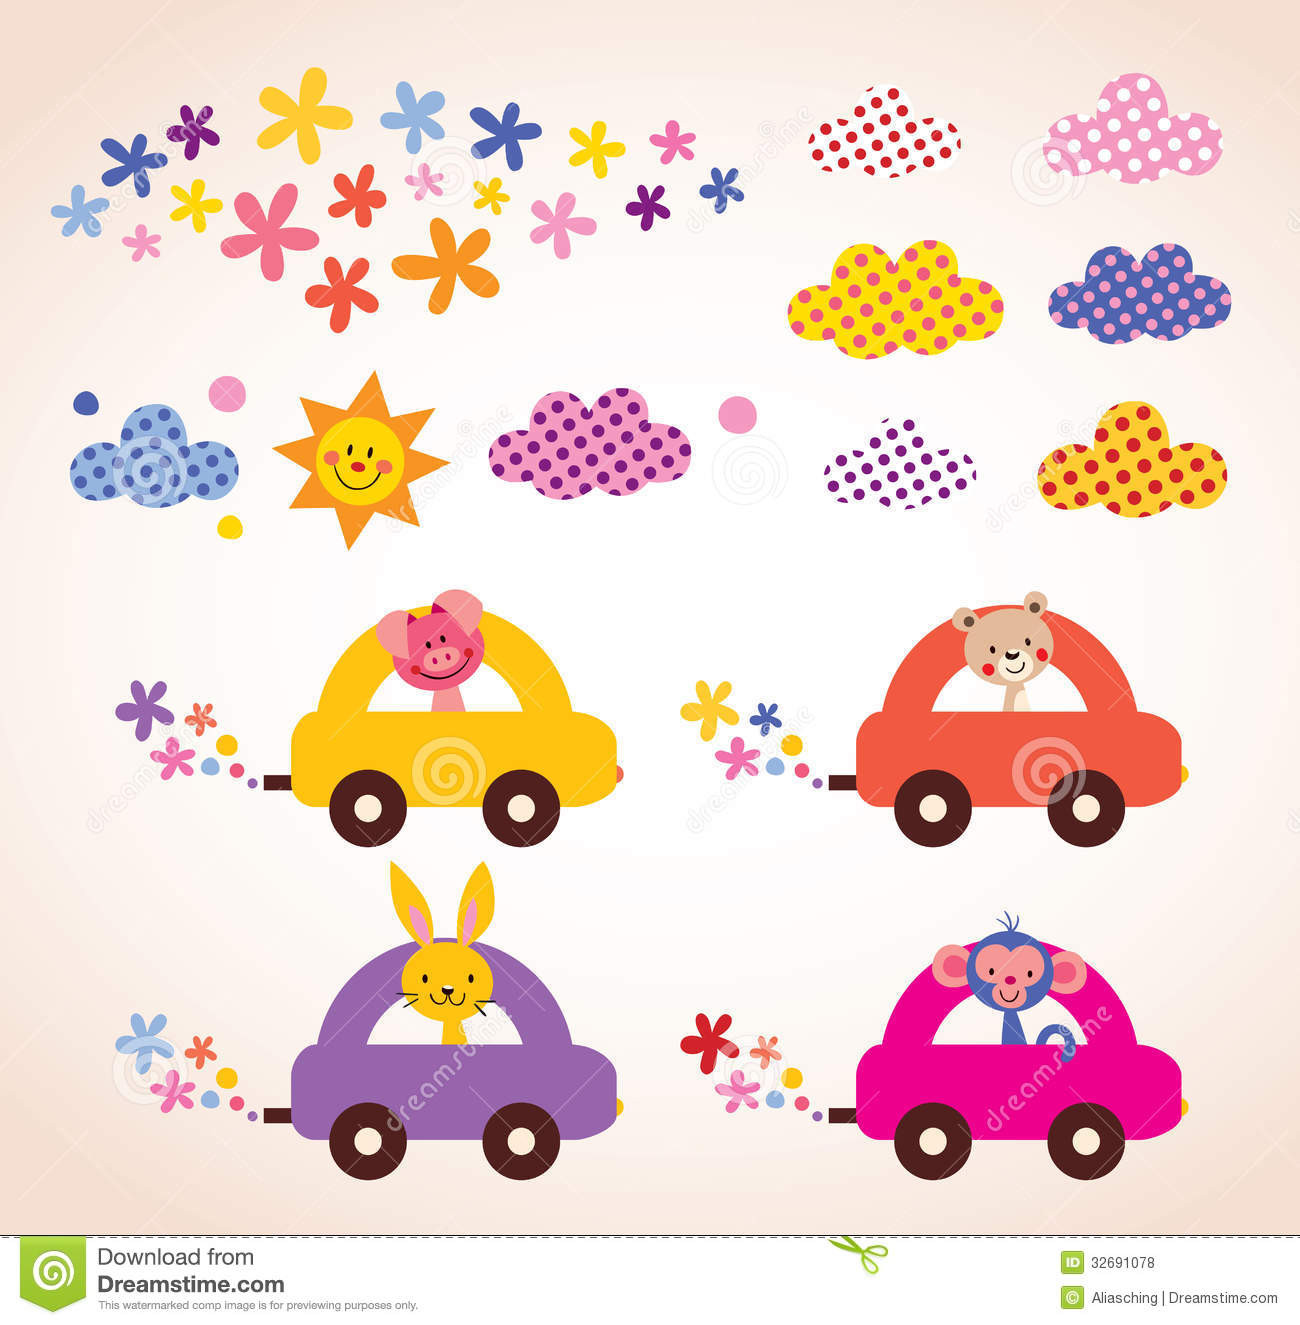 Cute Things For Kids
 Cute Animals Driving Cars Kids Stuff Design Elements Set